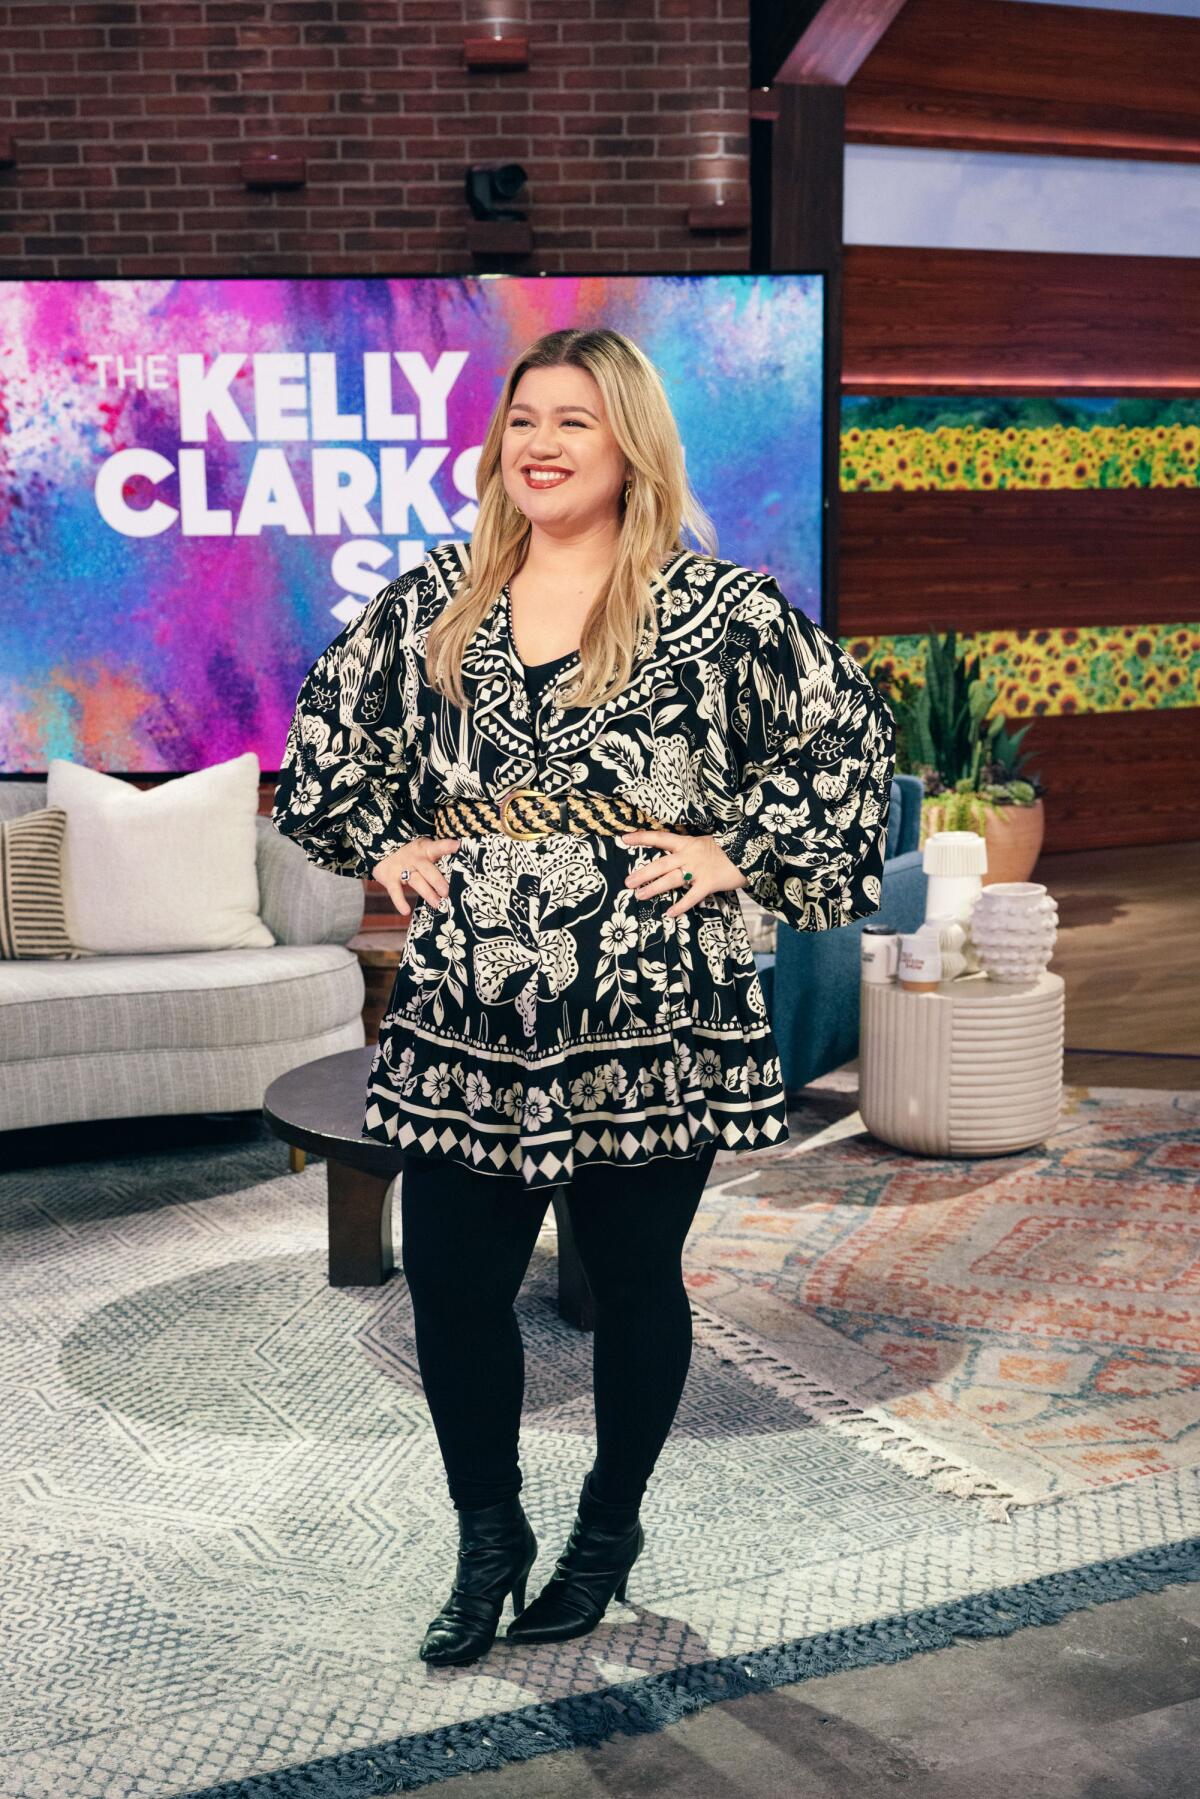 Kelly Clarkson standing with hands on waist, smiling while wearing black and white dress on set of her show